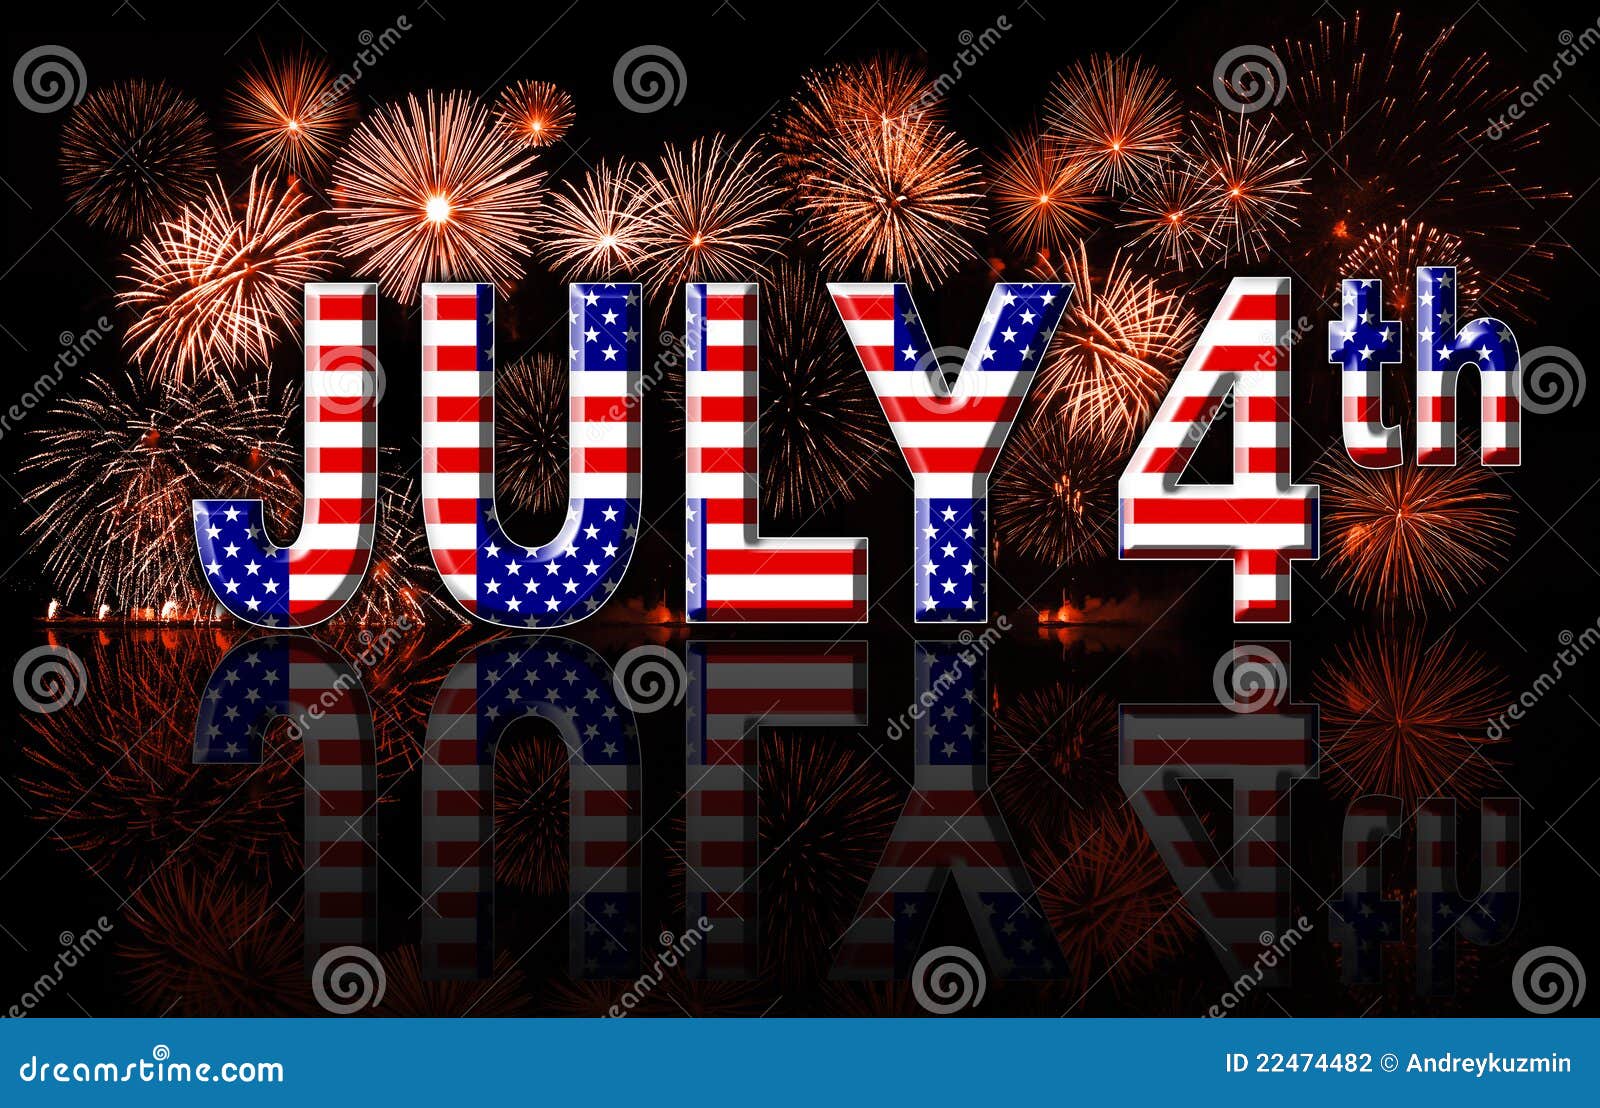 Happy 4th of July Wallpaper 56 pictures